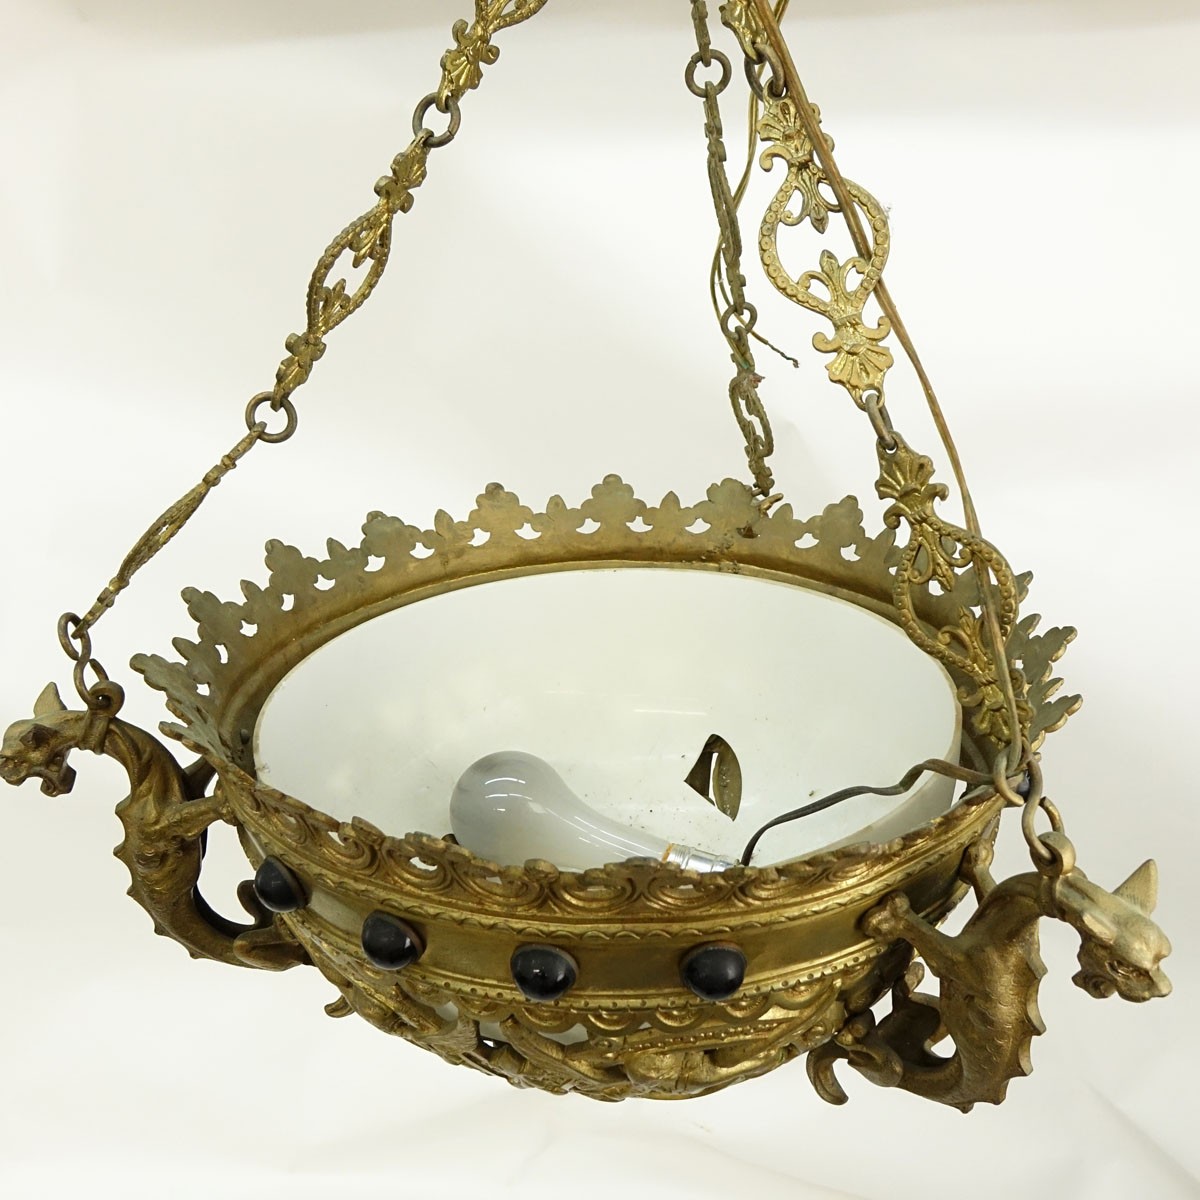 Antique Gothic Style Figural Gilt Bronze Dome Chandelier with Applied Glass Beads. Rubbing to gilt, insert has a loss.